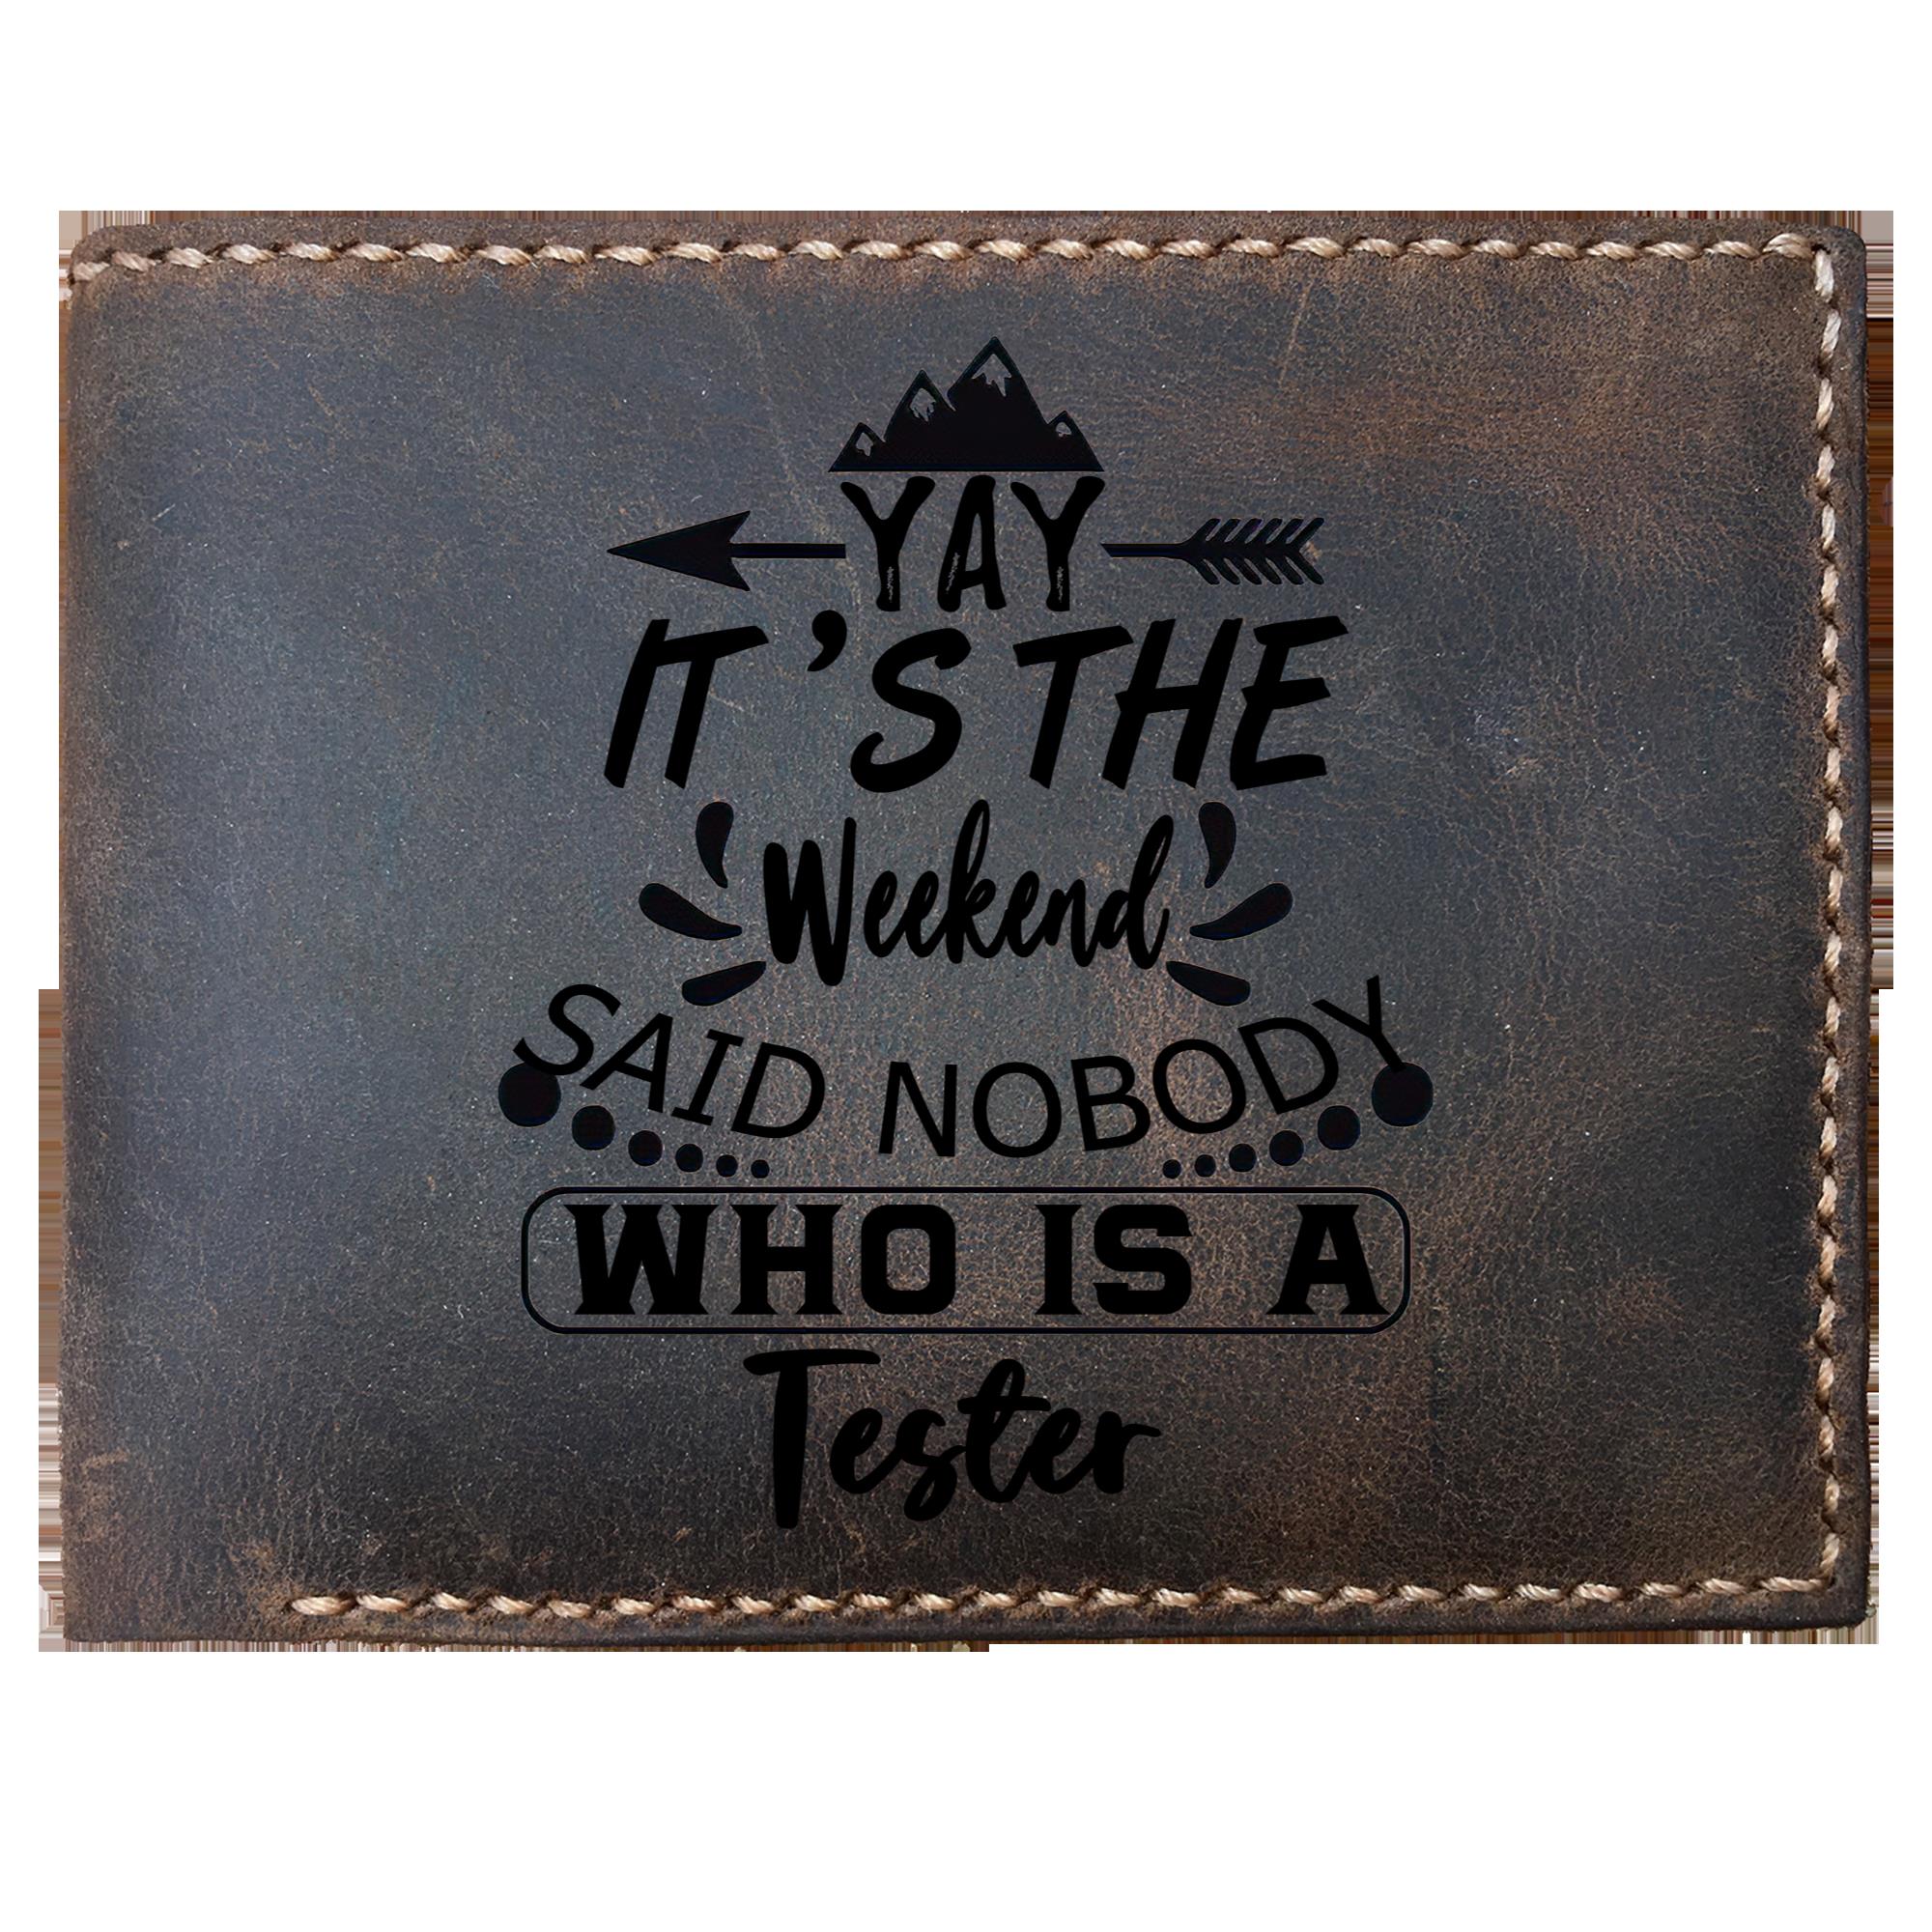 Skitongifts Funny Custom Laser Engraved Bifold Leather Wallet For Men, It's The Weekend Said Nobody Who Is A Tester, Father's Day Gifts